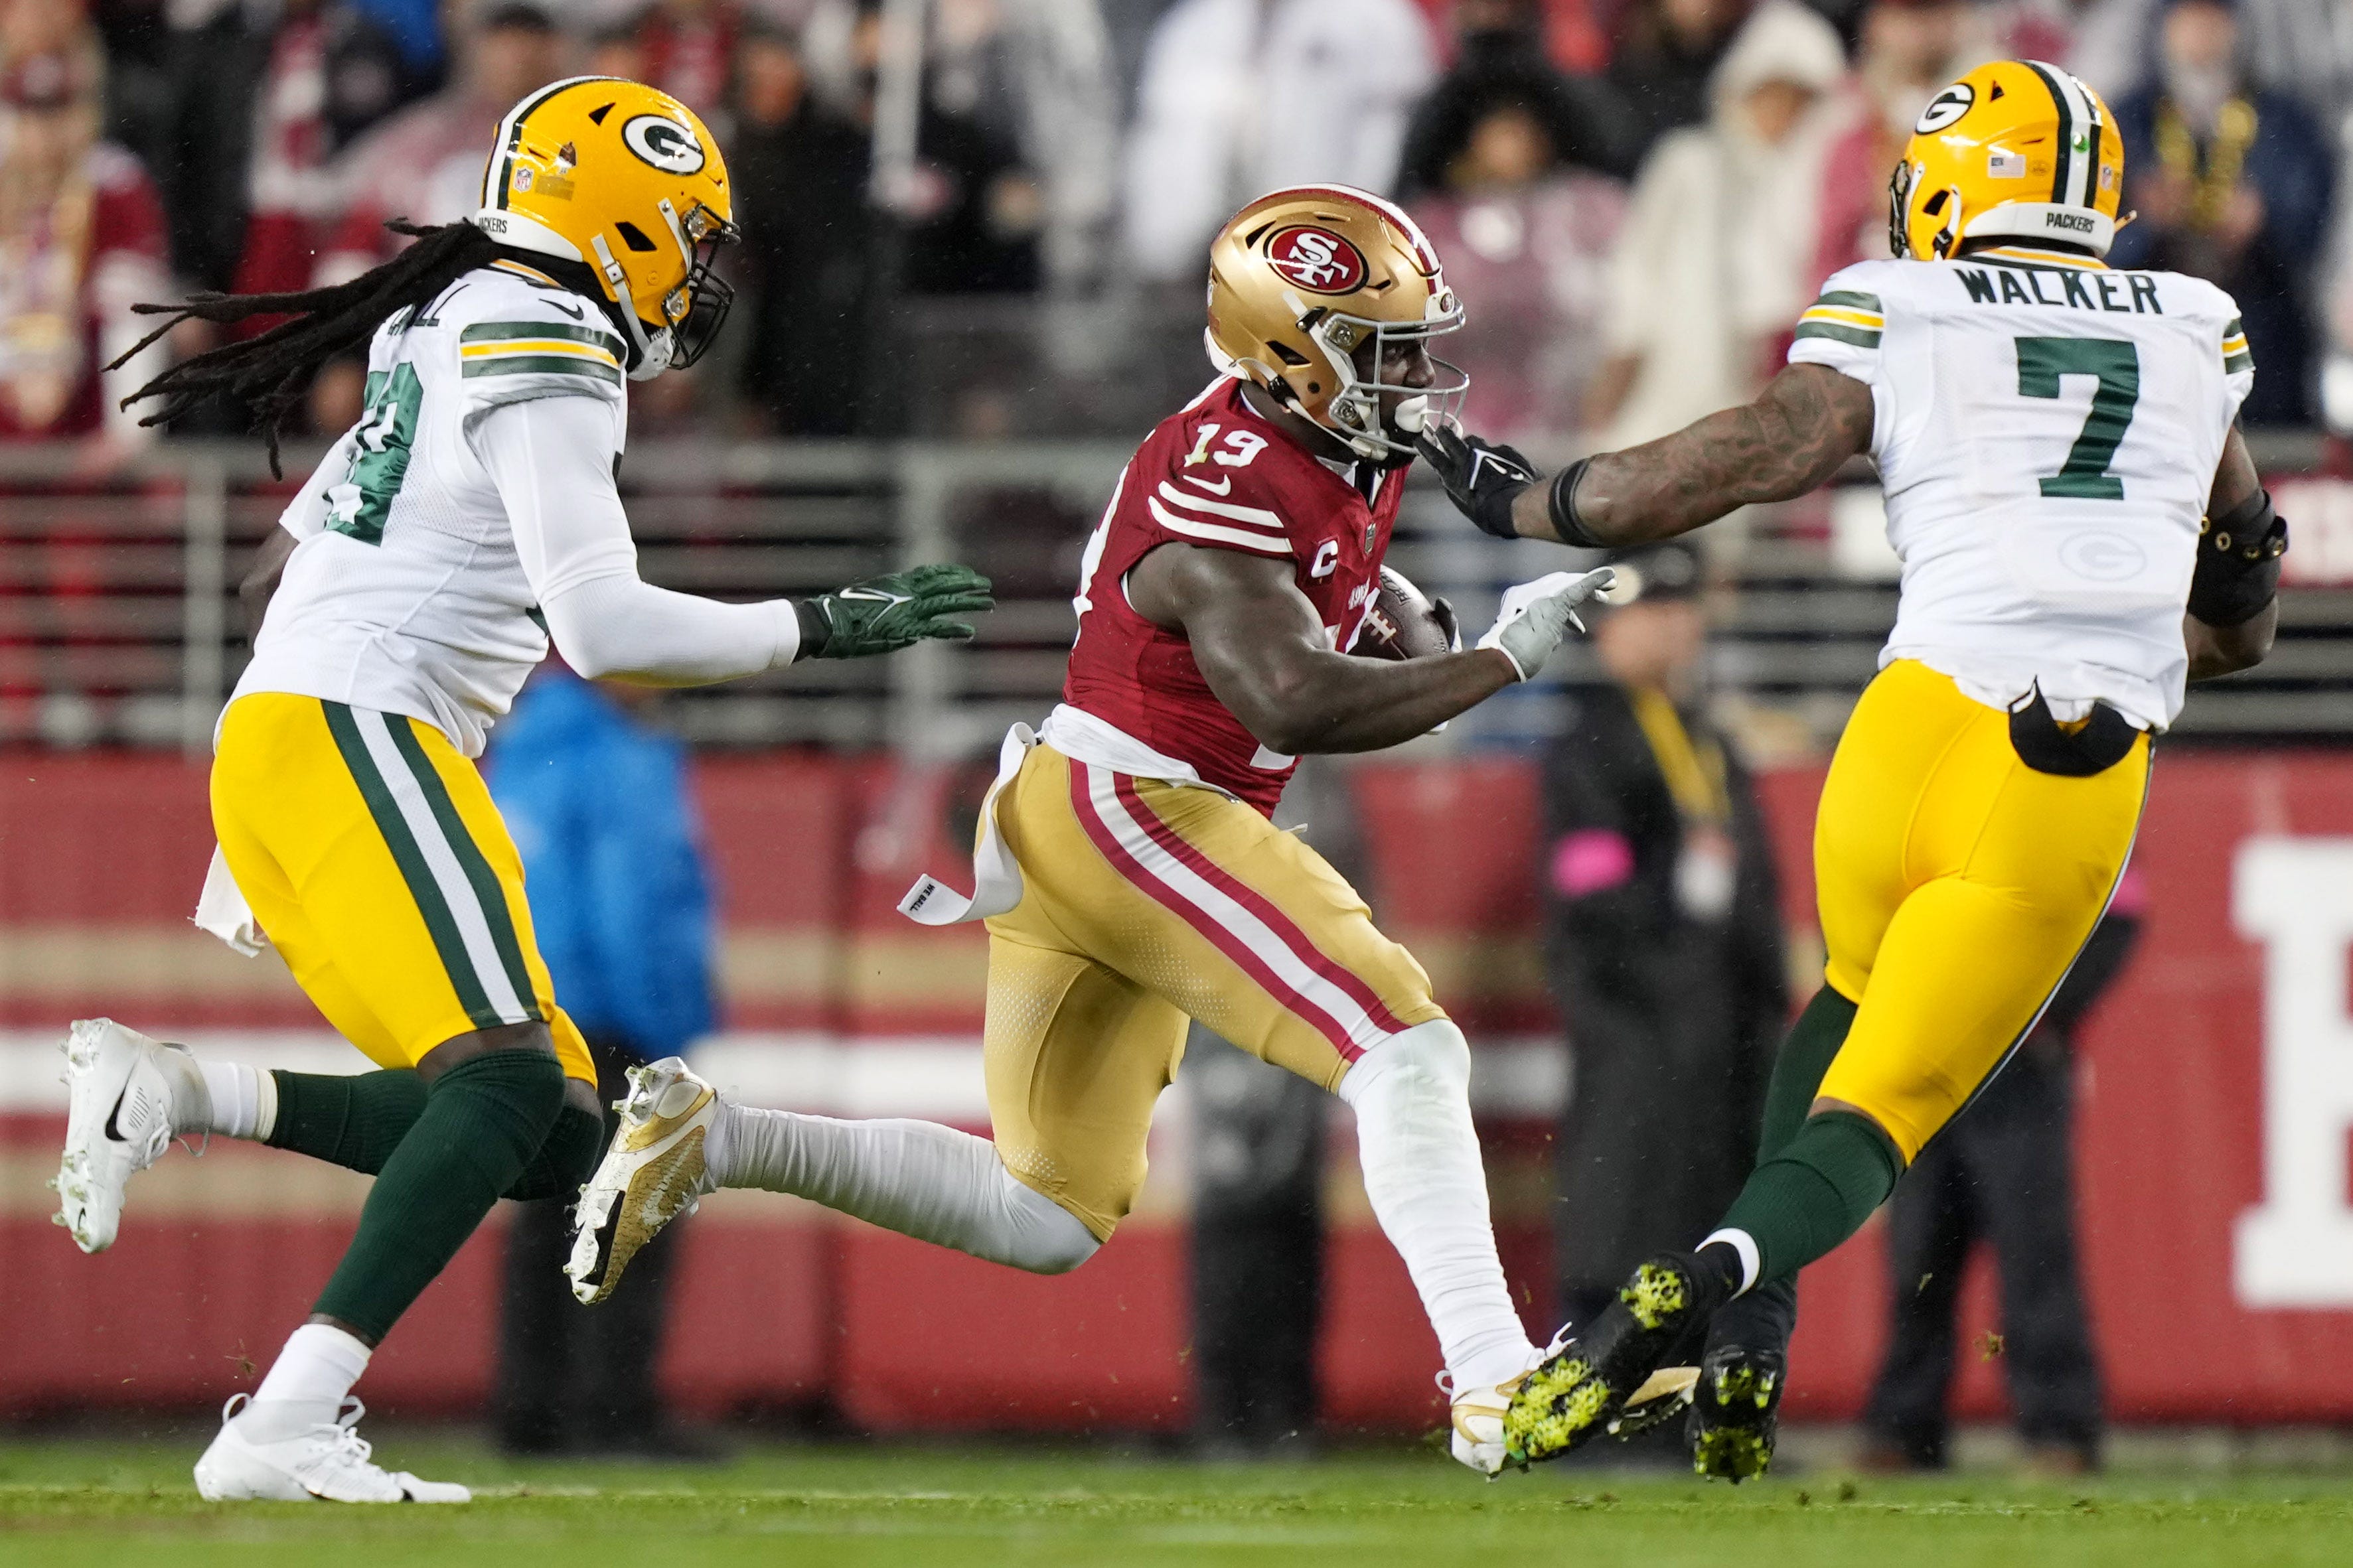 draftkings refunded all wagers on deebo samuel after he left packers-49ers with an apparent injury in the first half